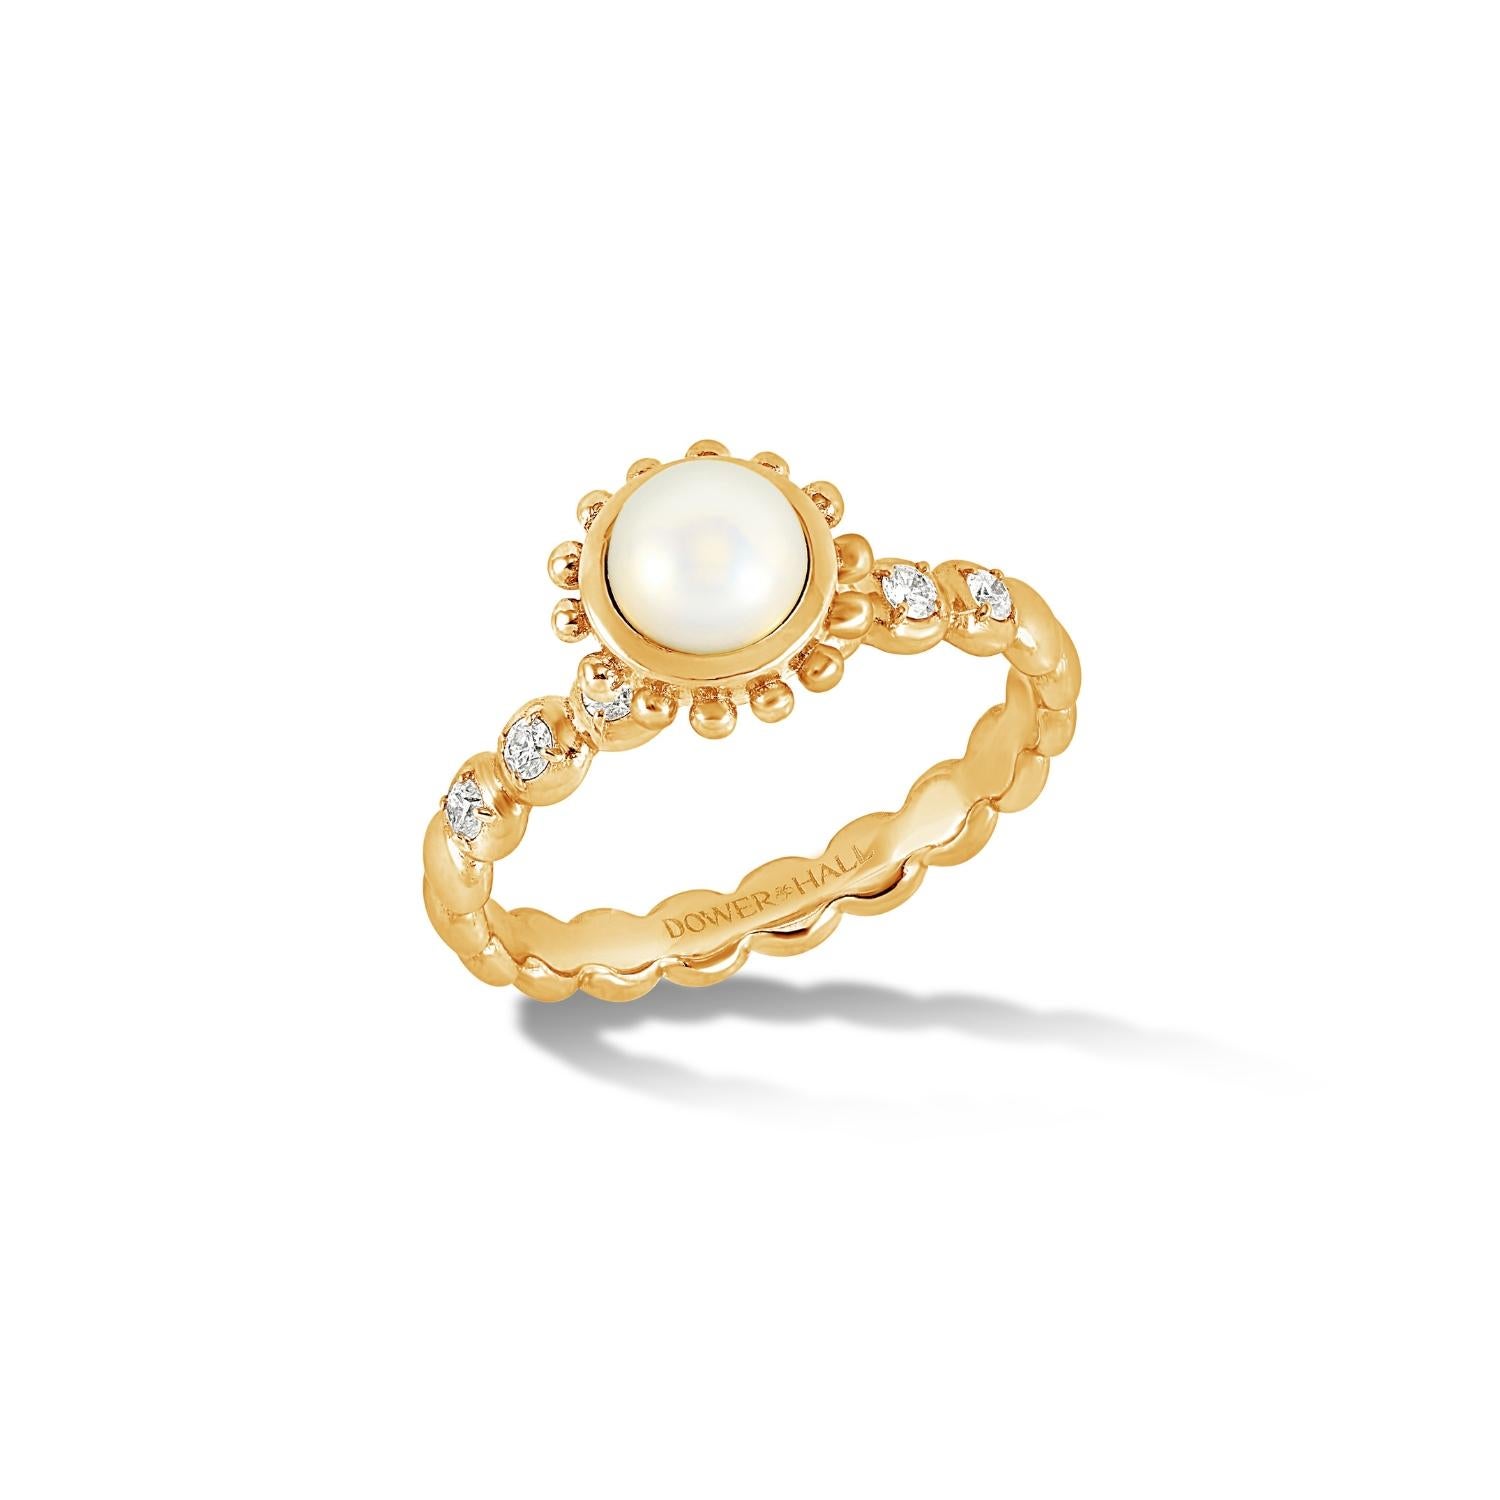 This striking ring is set with a round White Pearl in 14k yellow gold featuring granulated balls around the outside of the rub-over setting and with diamonds claw set in the dotty style band. Inspired by creatures of the coral reef, this colourful